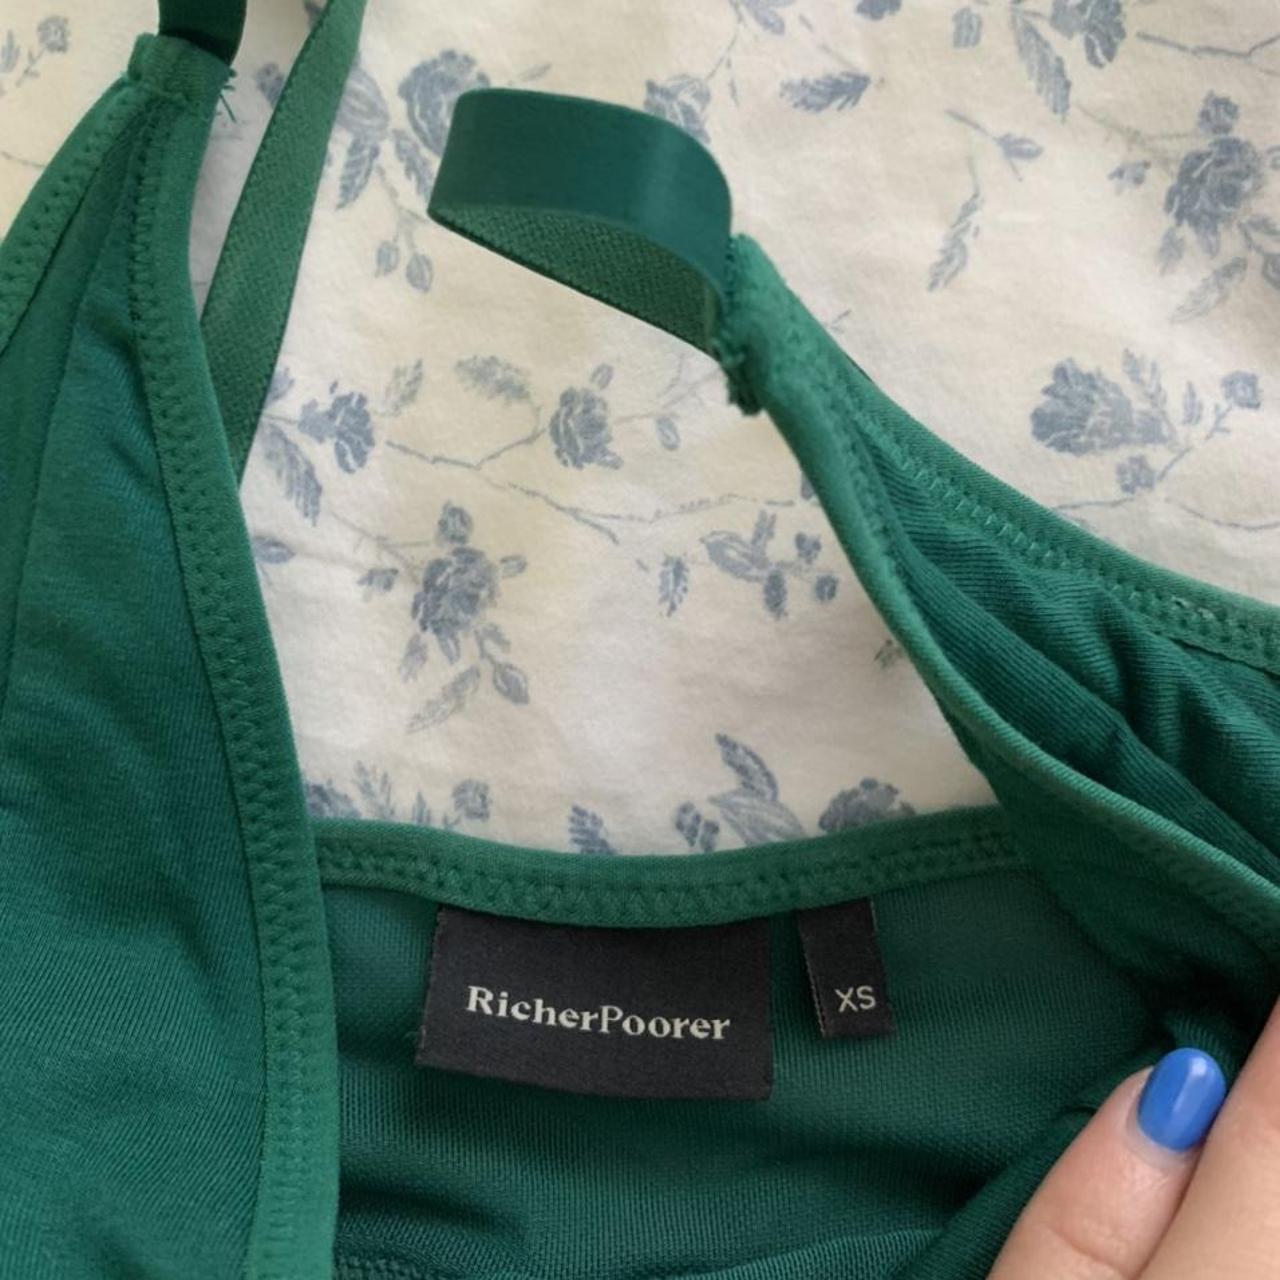 Product Image 3 - Green richer poorer xs bra!